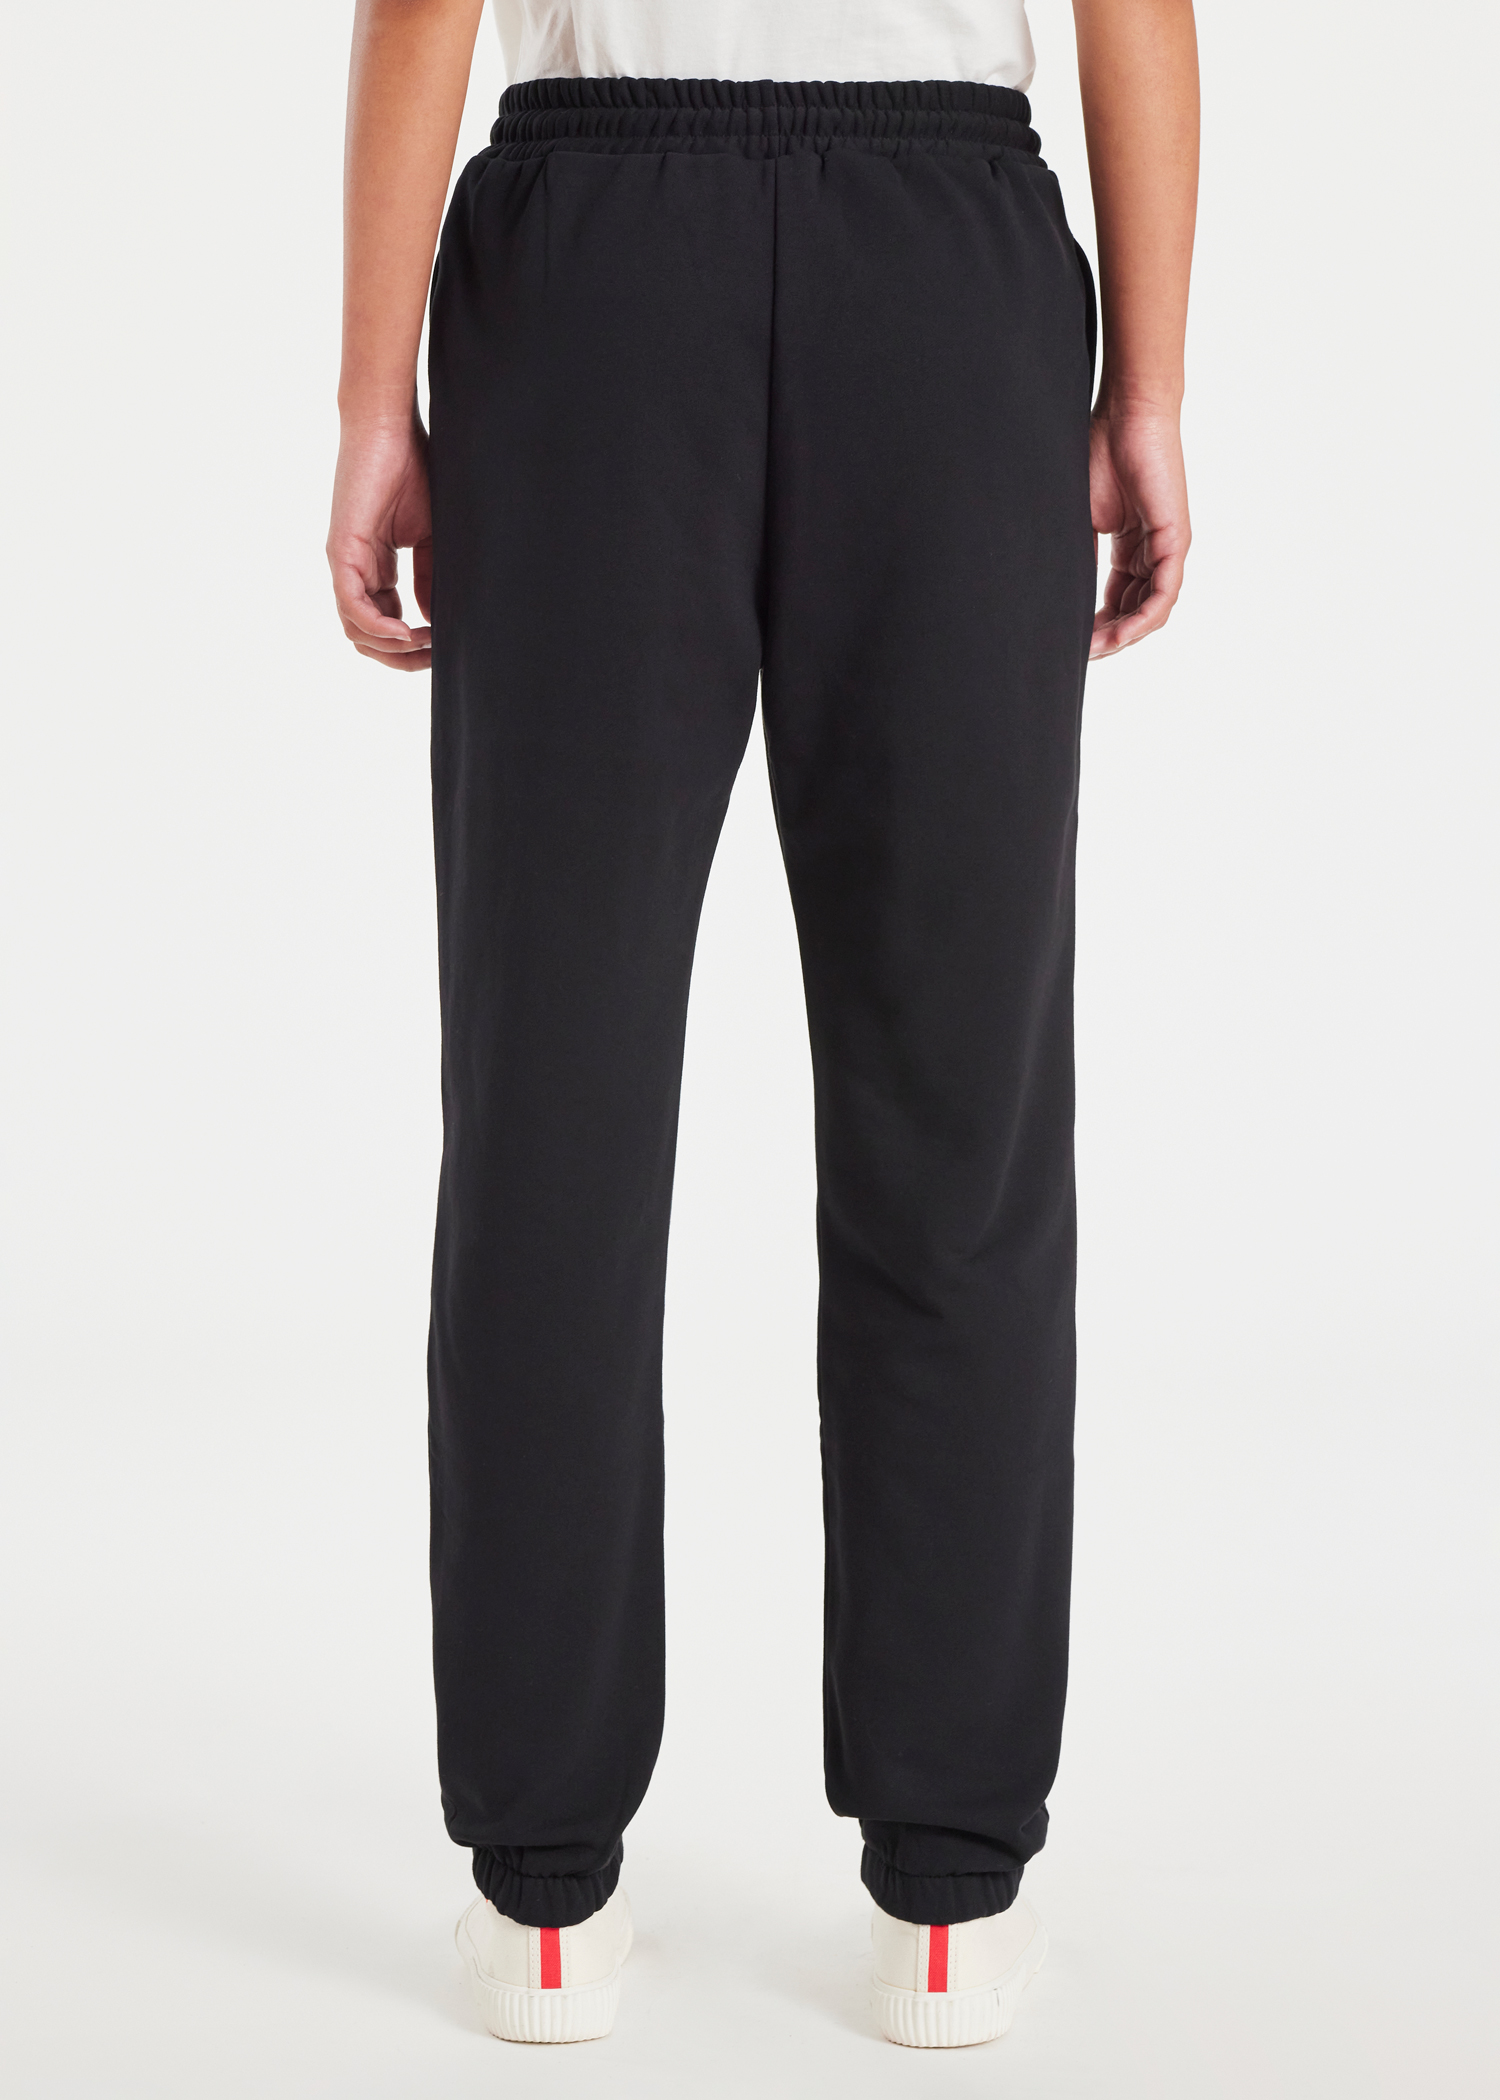 Paul Smith Brushed cotton Boot Cut Joggers women - Glamood Outlet